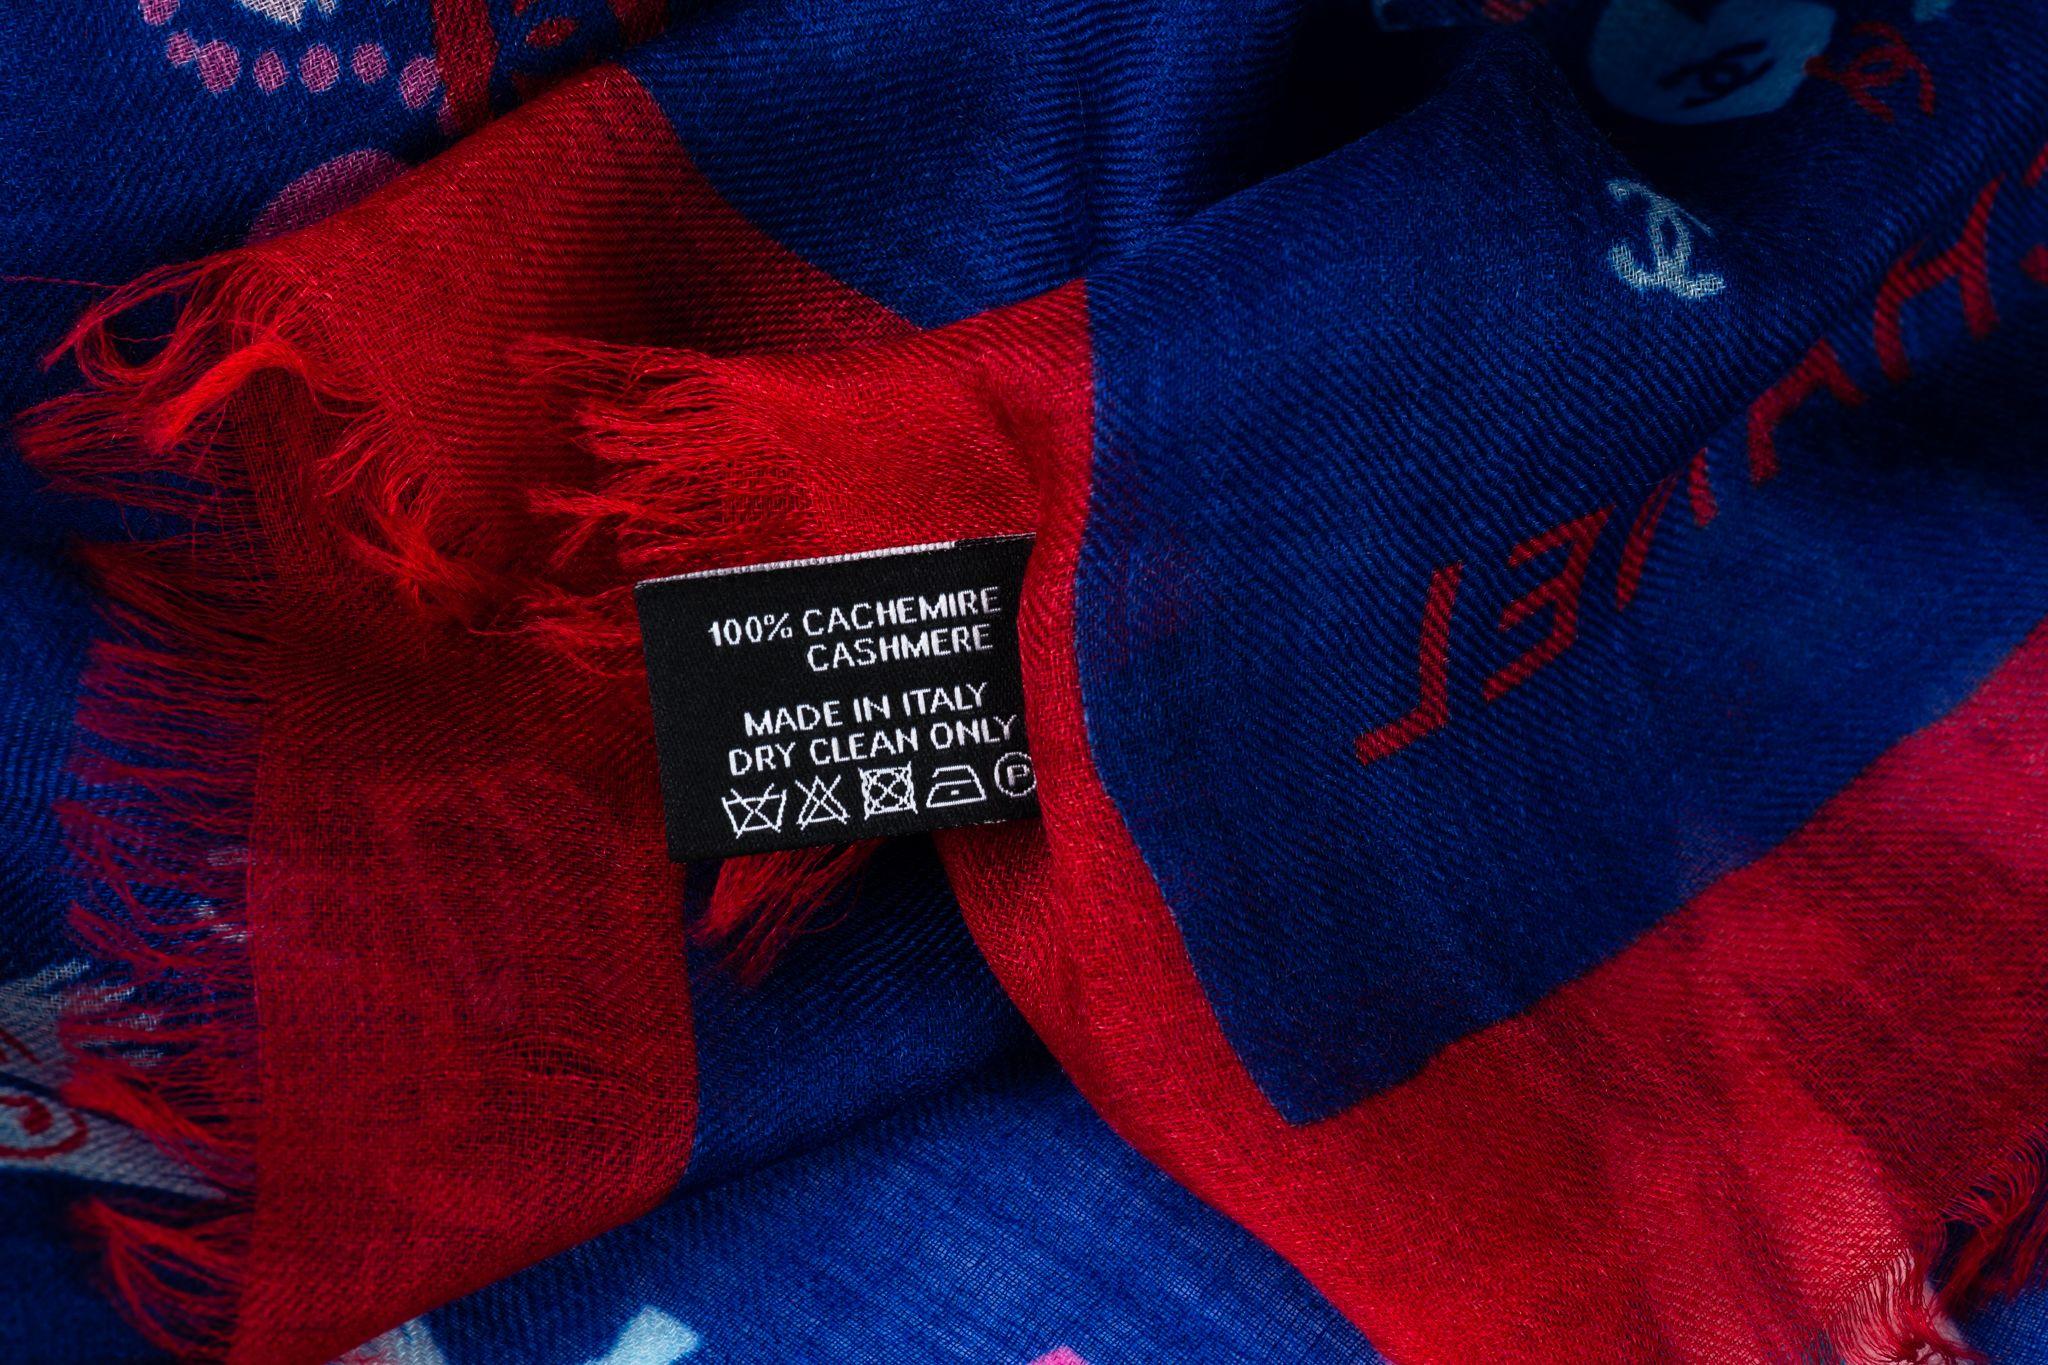 Chanel new lettering cashmere shawl in navy blue and red . Original care tag.